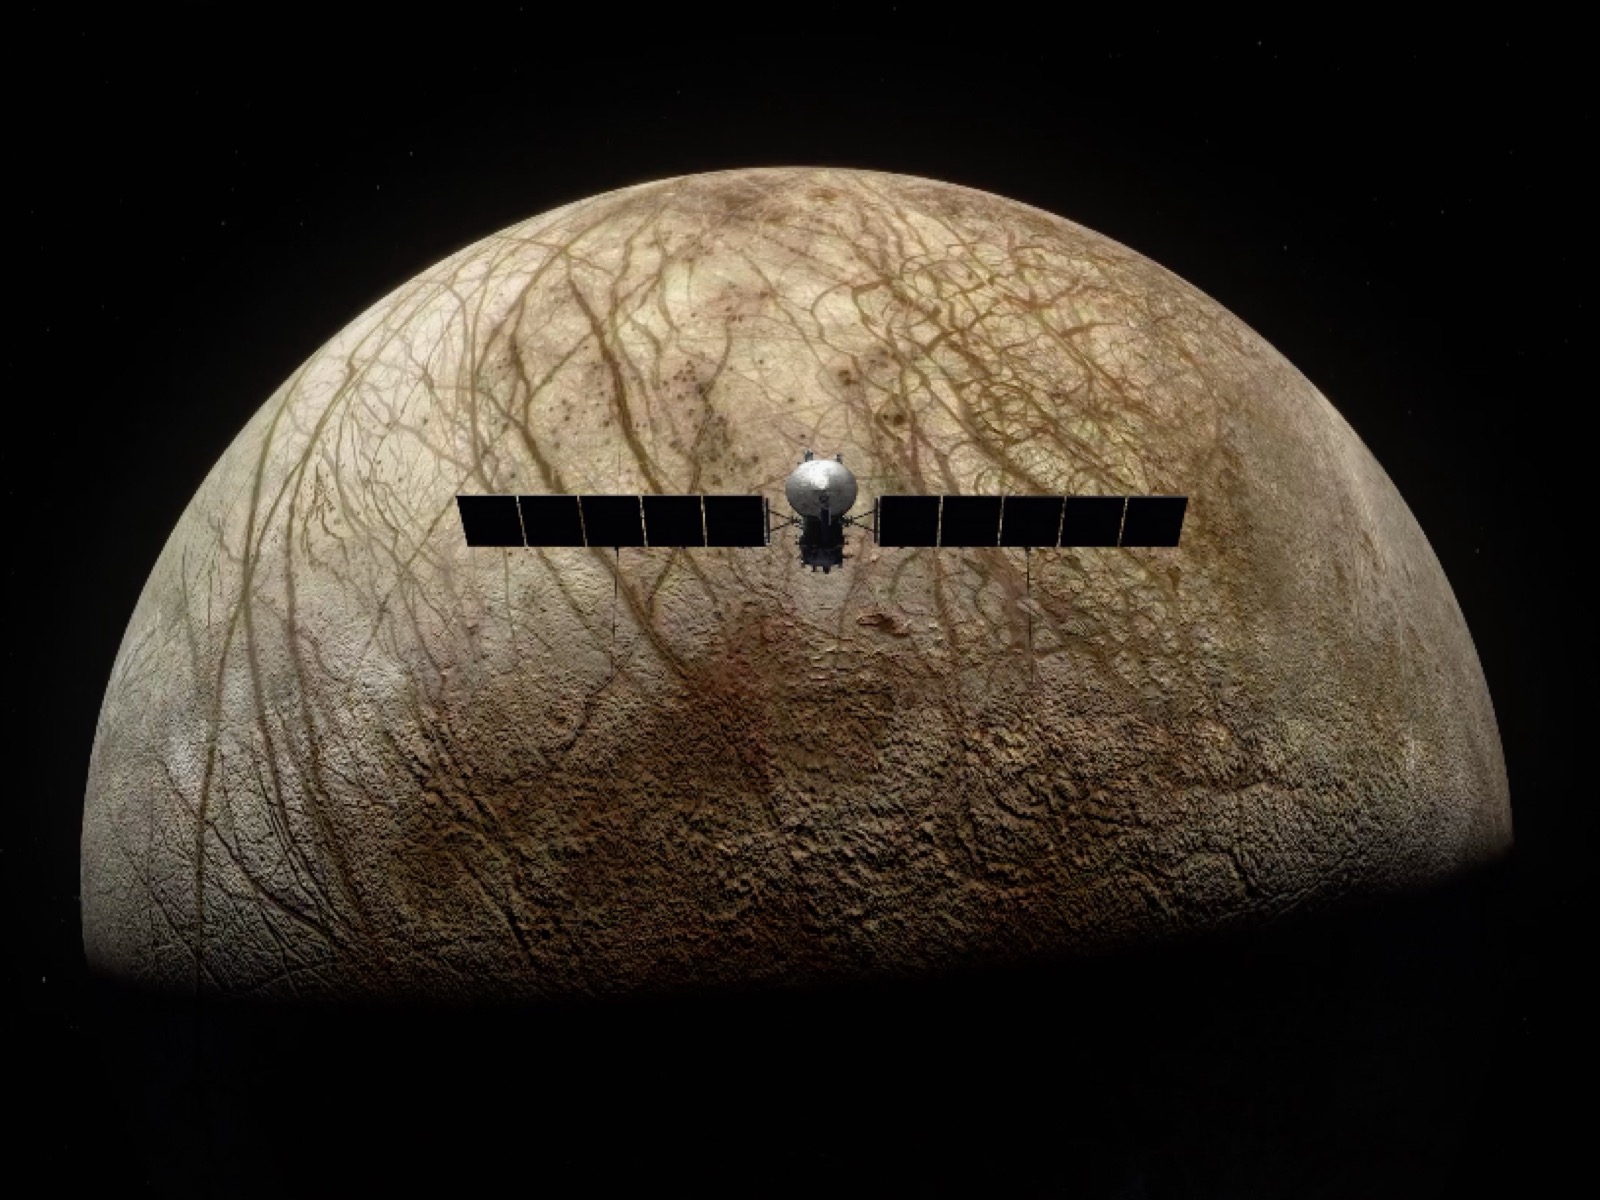 Image of Clipper Spacecraft over Europa moon.